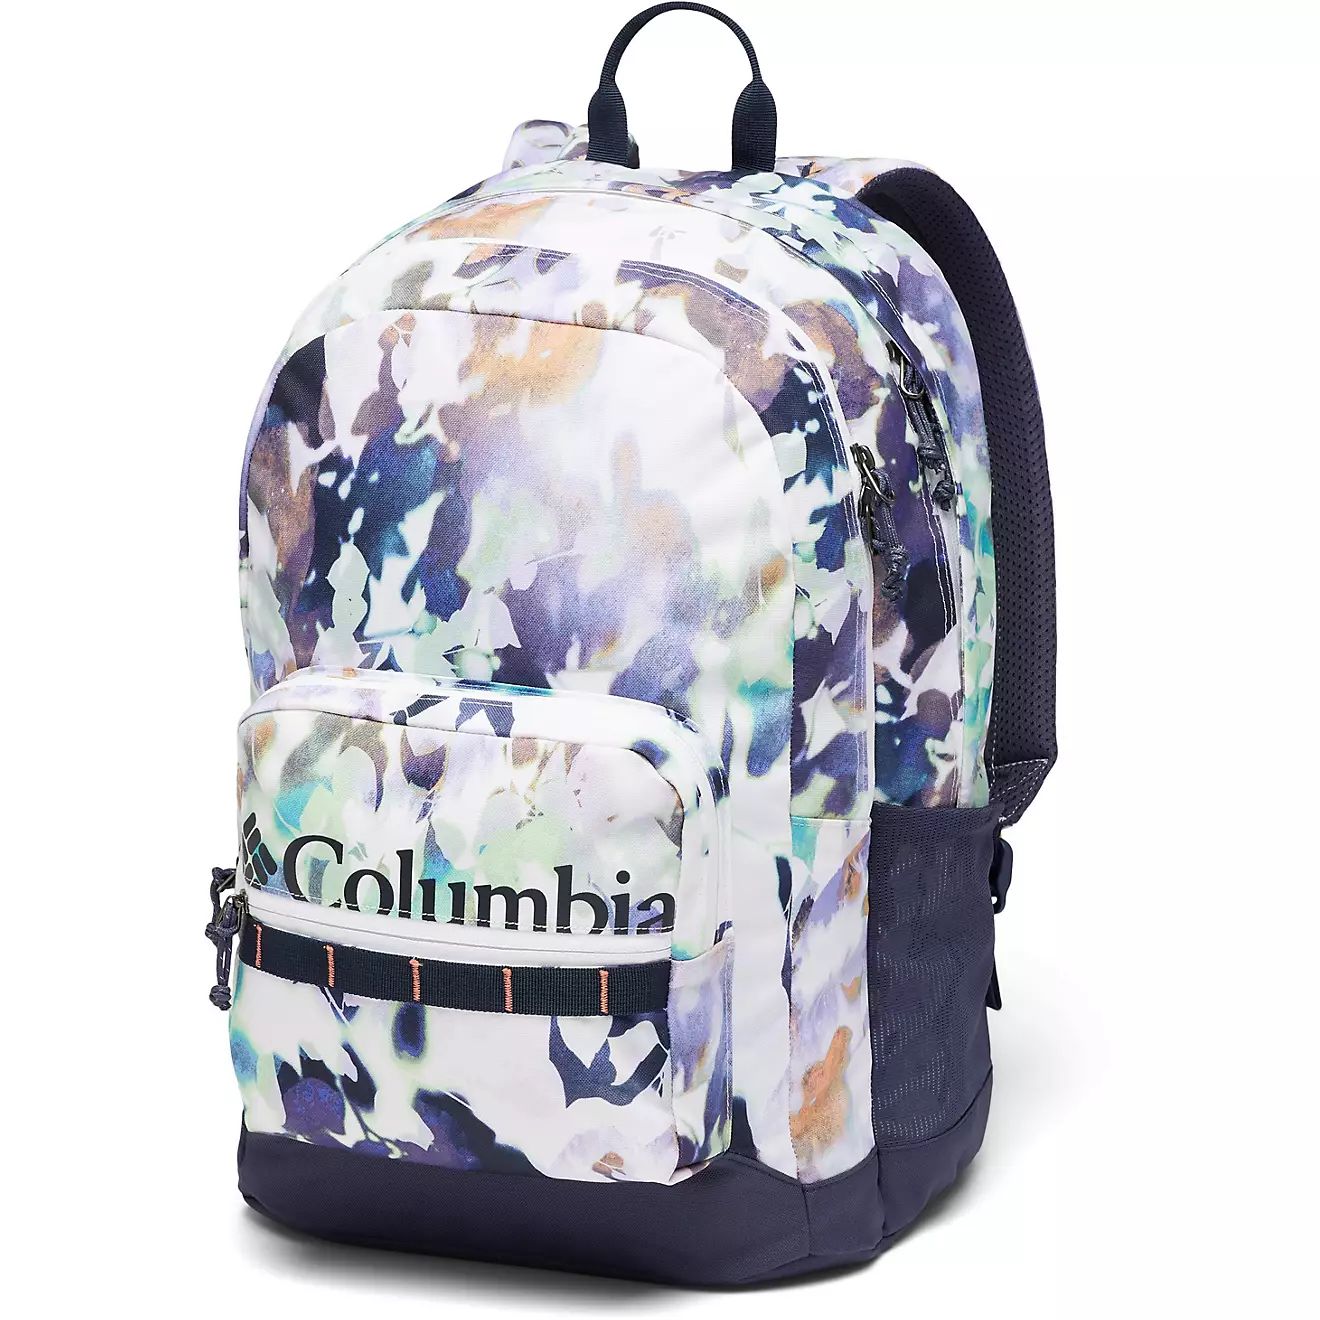 Columbia Sportswear Zigzag 30L Backpack | Academy Sports + Outdoors